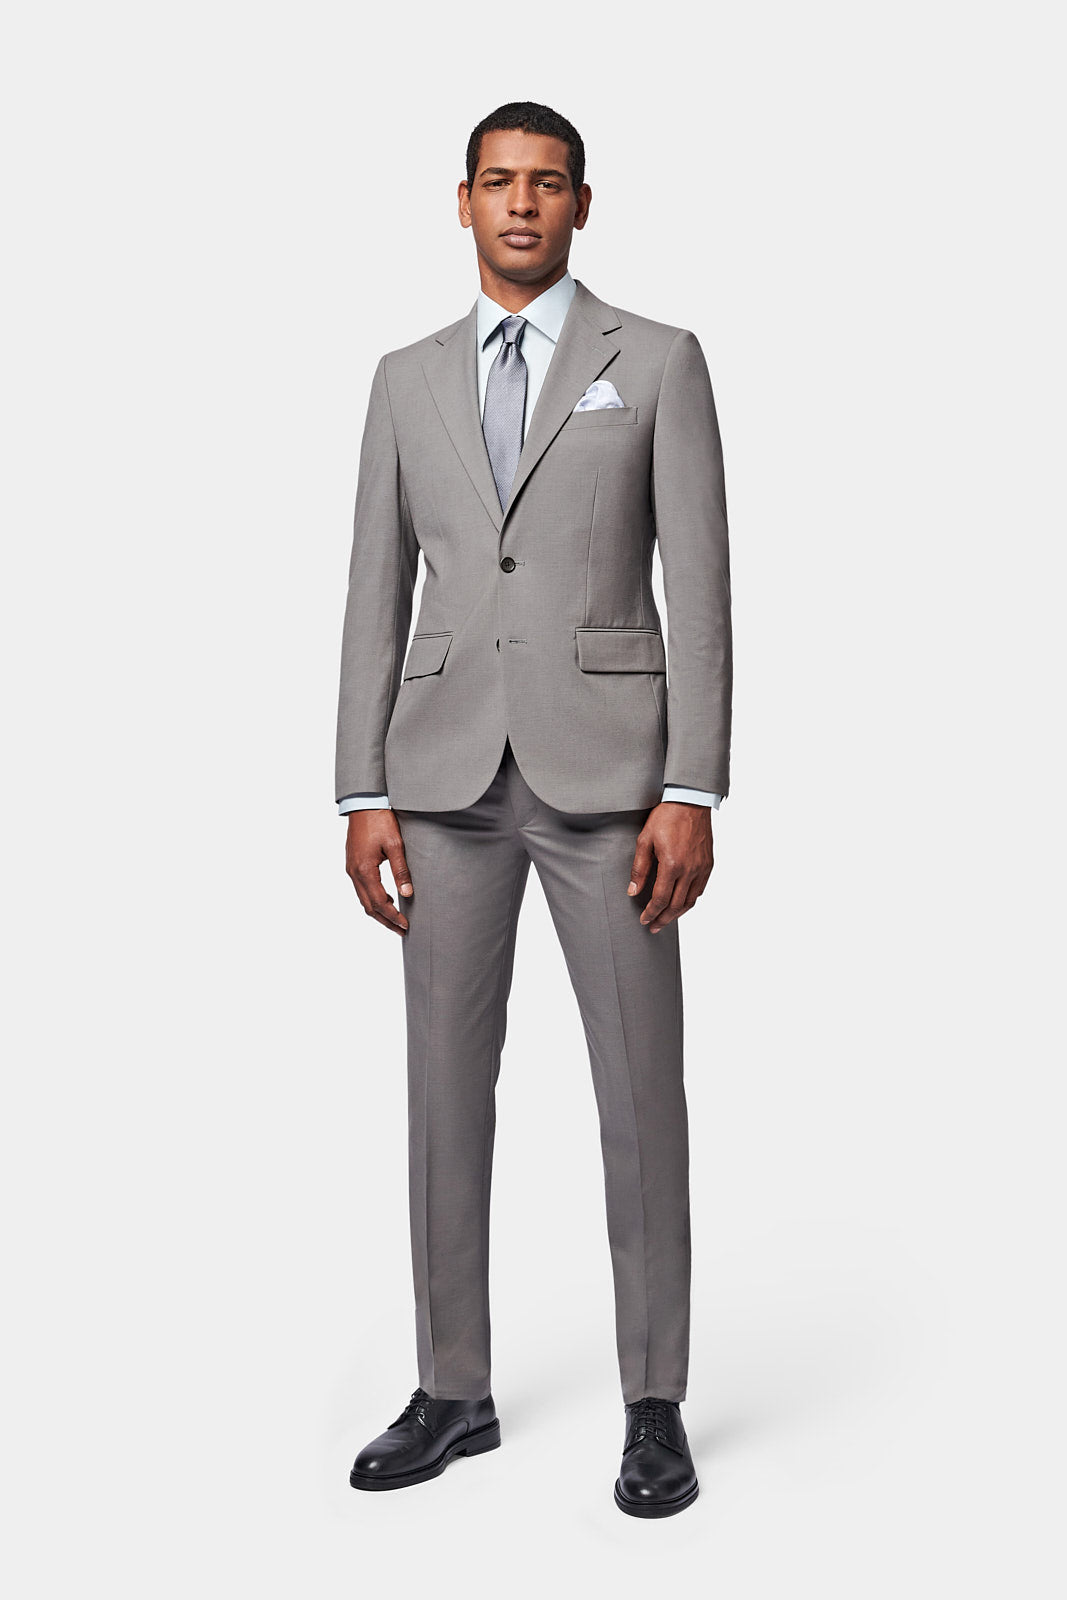 Classic Notched Lapel Suit Jacket in Charcoal Grey